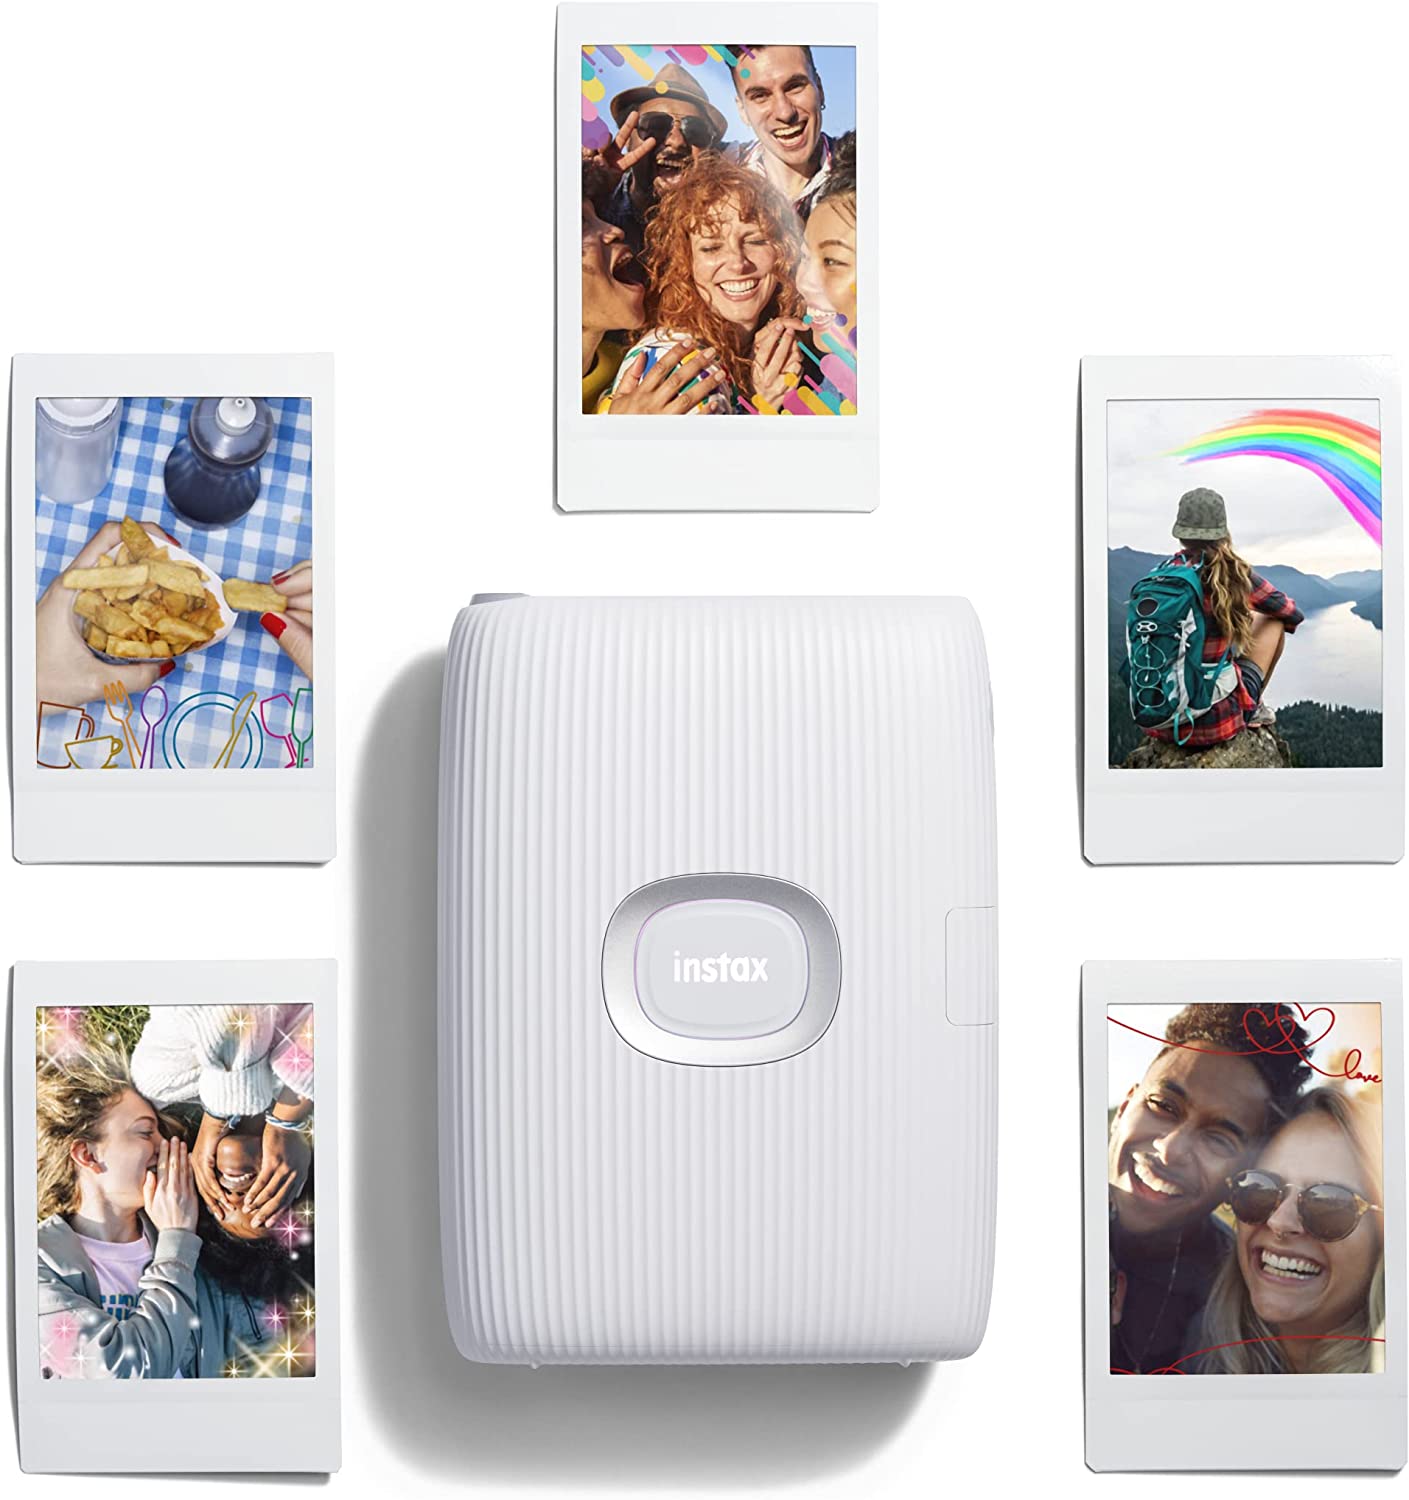 A close up view of a Bluetooth smartphone printer by Instax. There are five printed photos laying next to the printer.